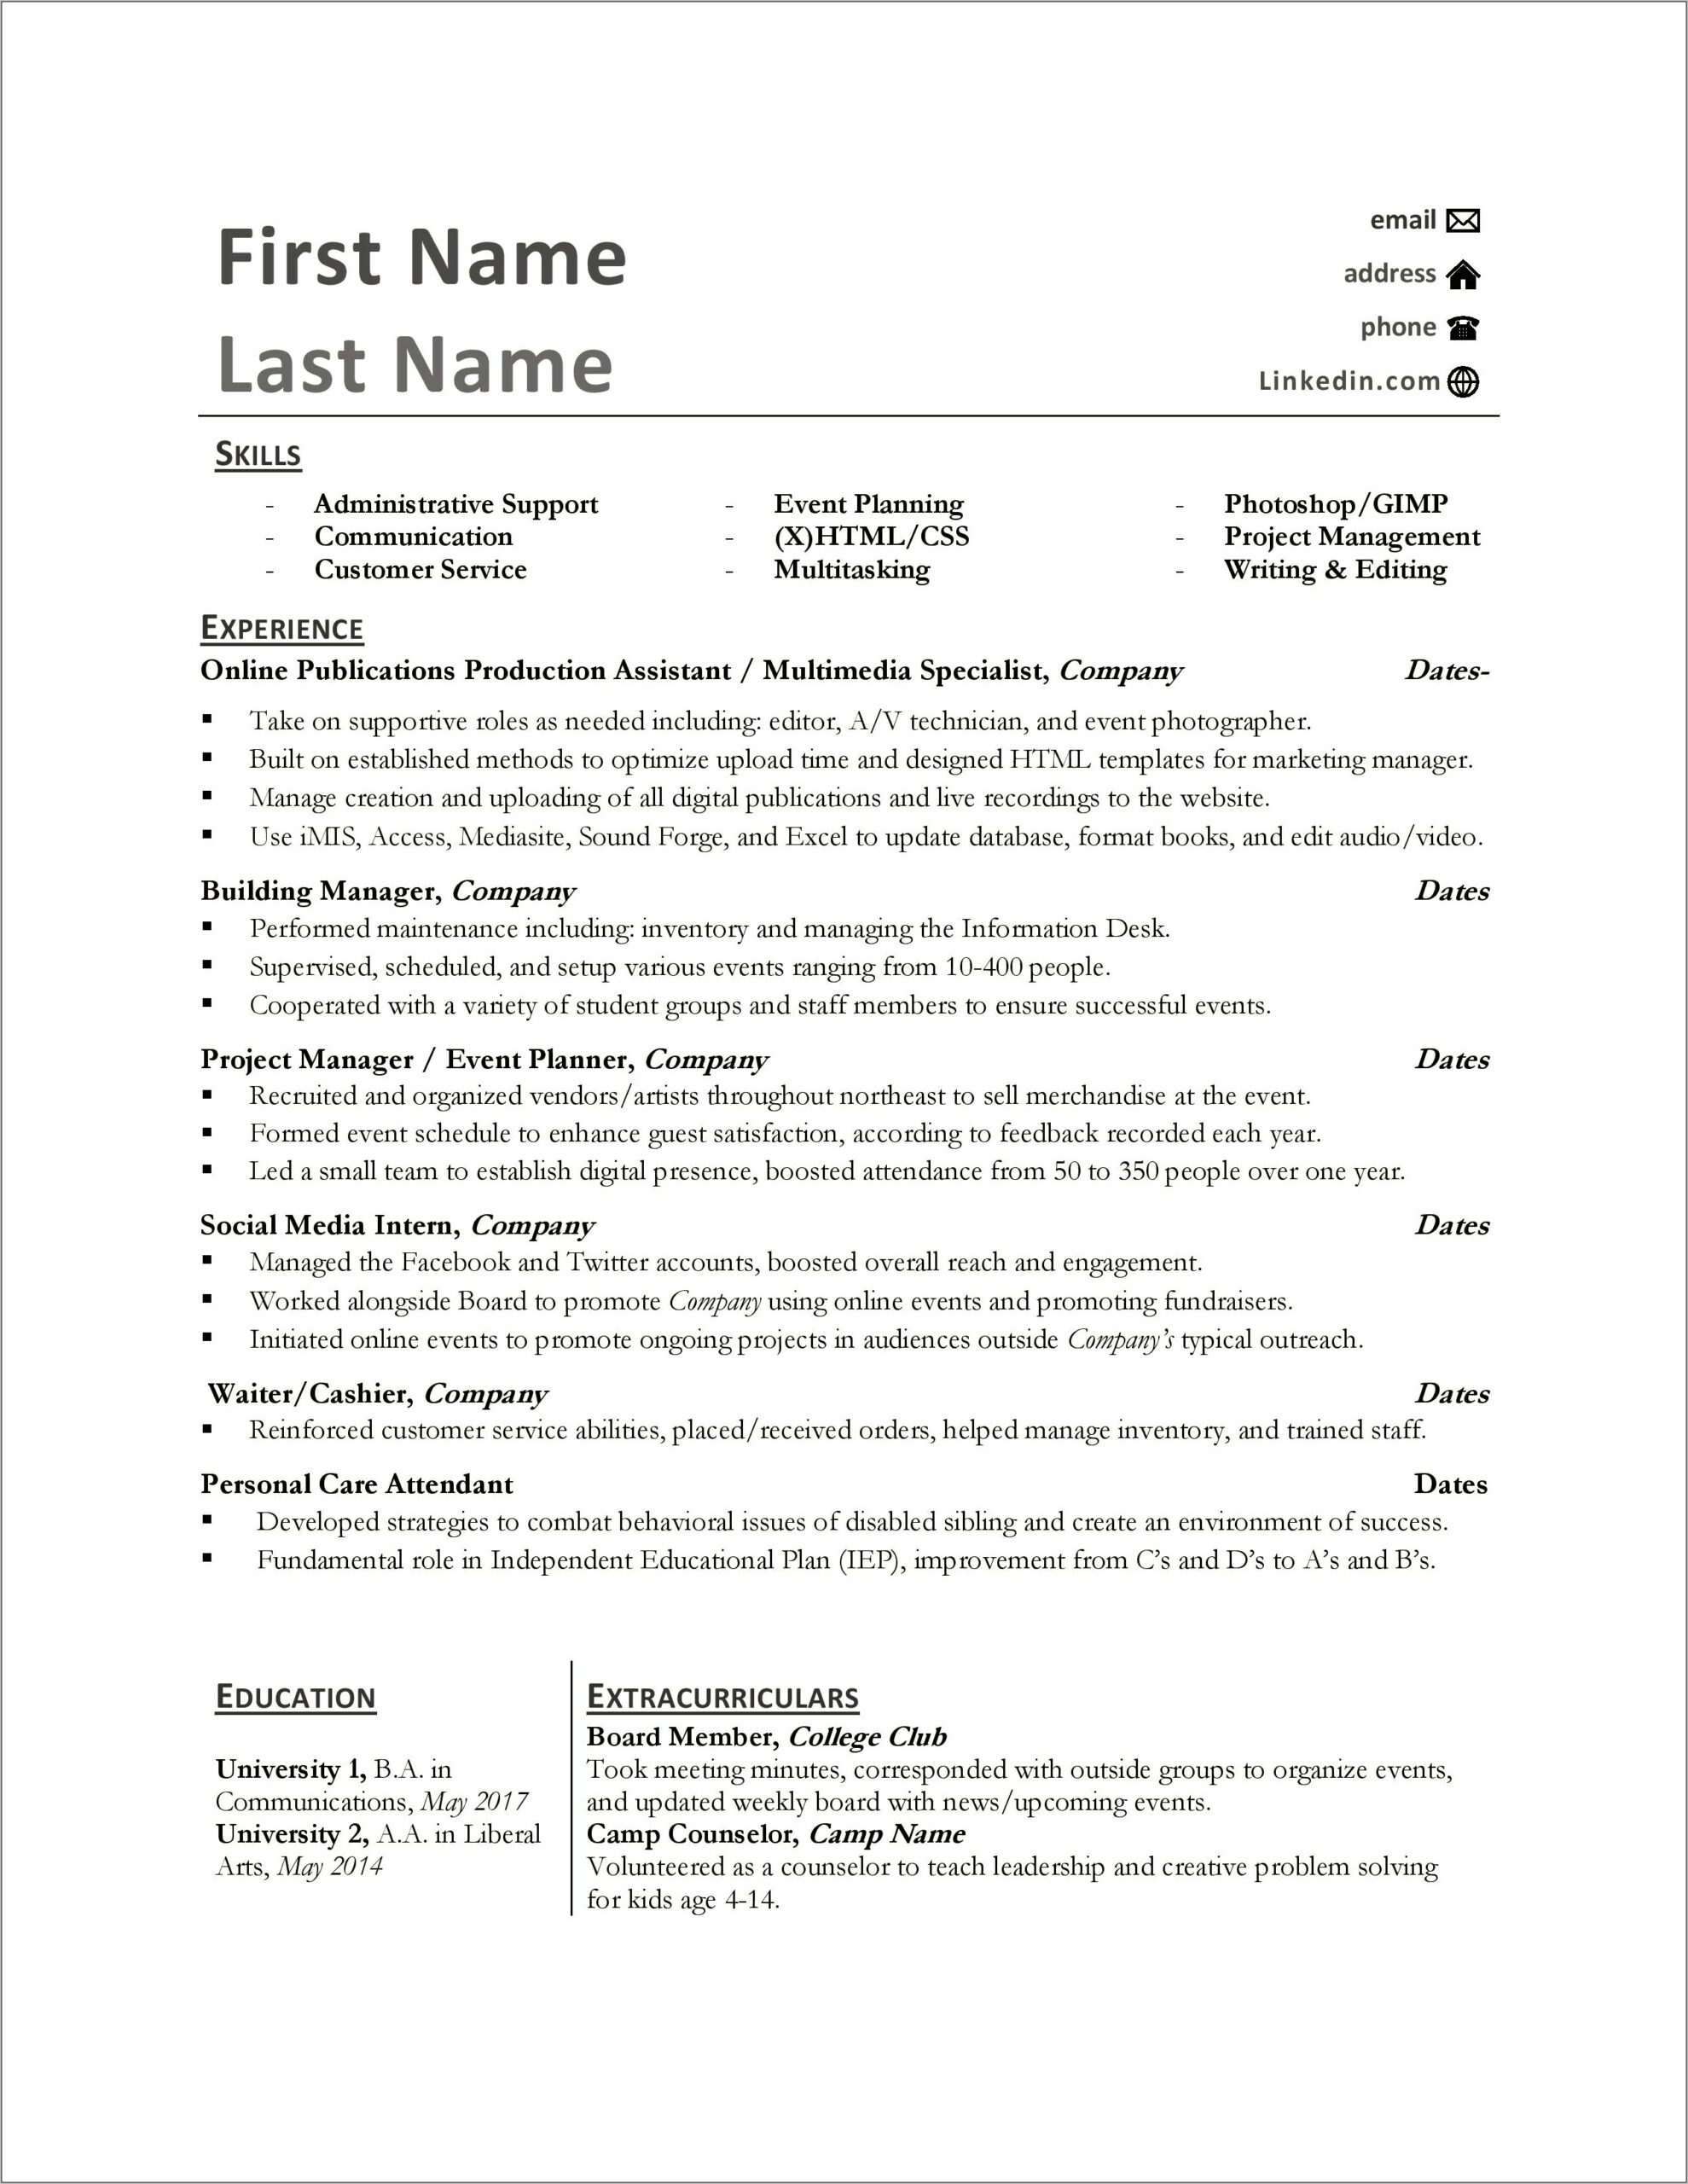 Resume Worked At Same Place But Different Positions